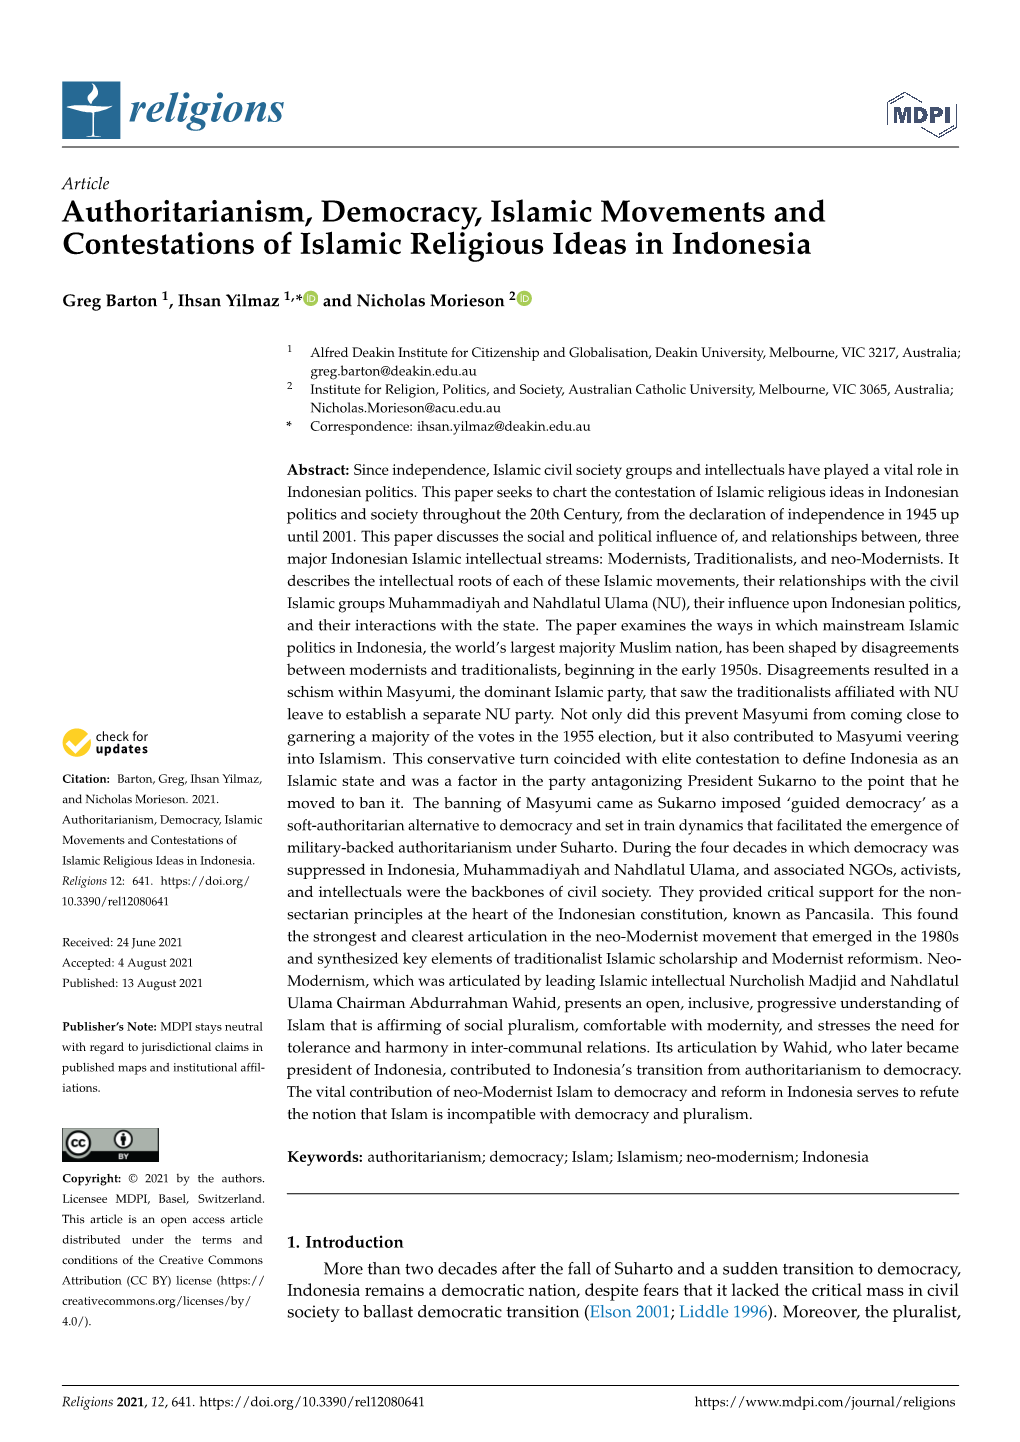 Authoritarianism, Democracy, Islamic Movements and Contestations of Islamic Religious Ideas in Indonesia